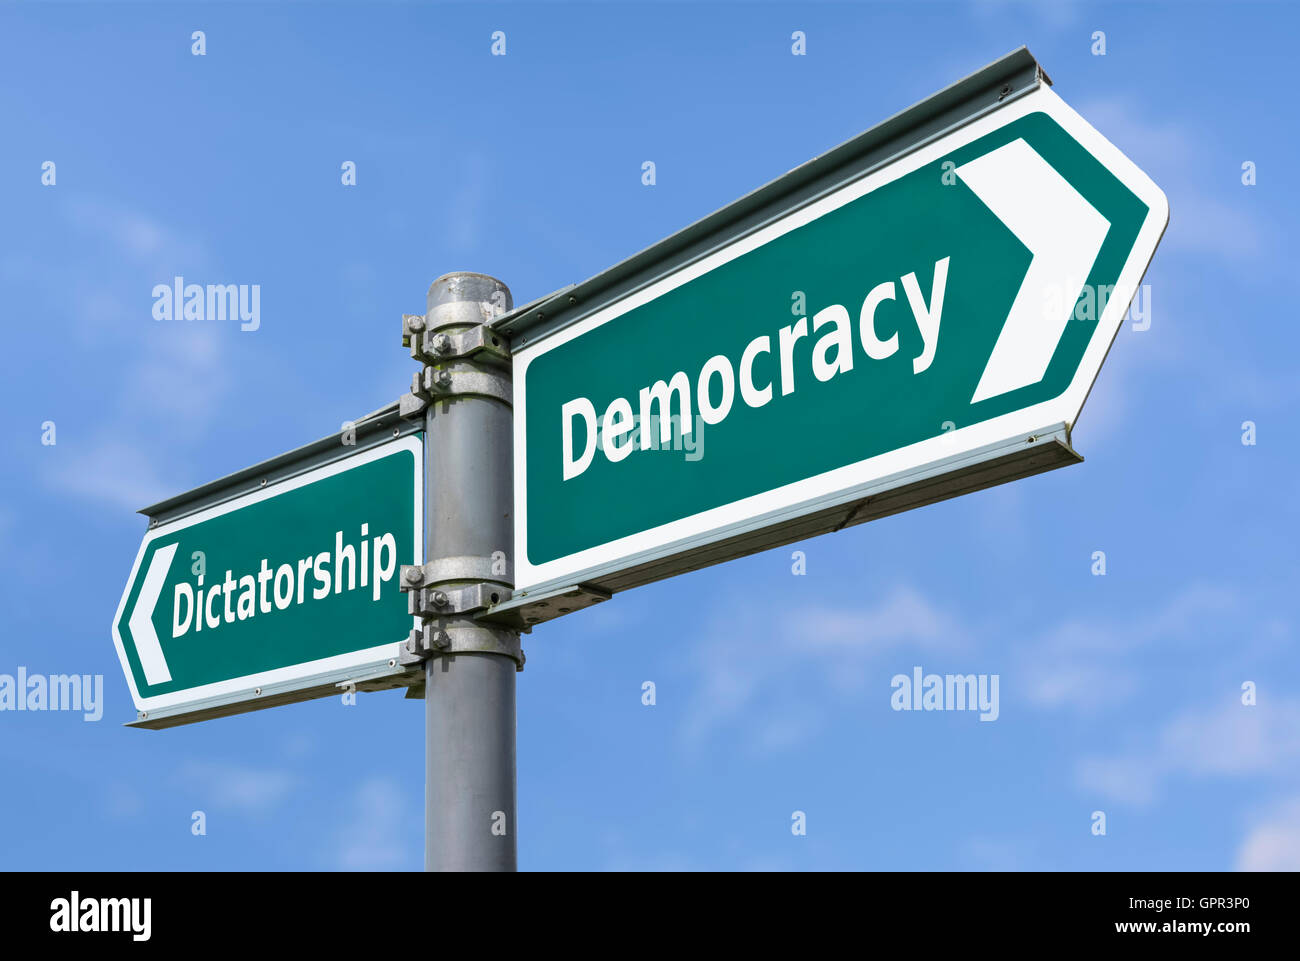 Dictatorship or Democracy sign to show concept of government types. Stock Photo